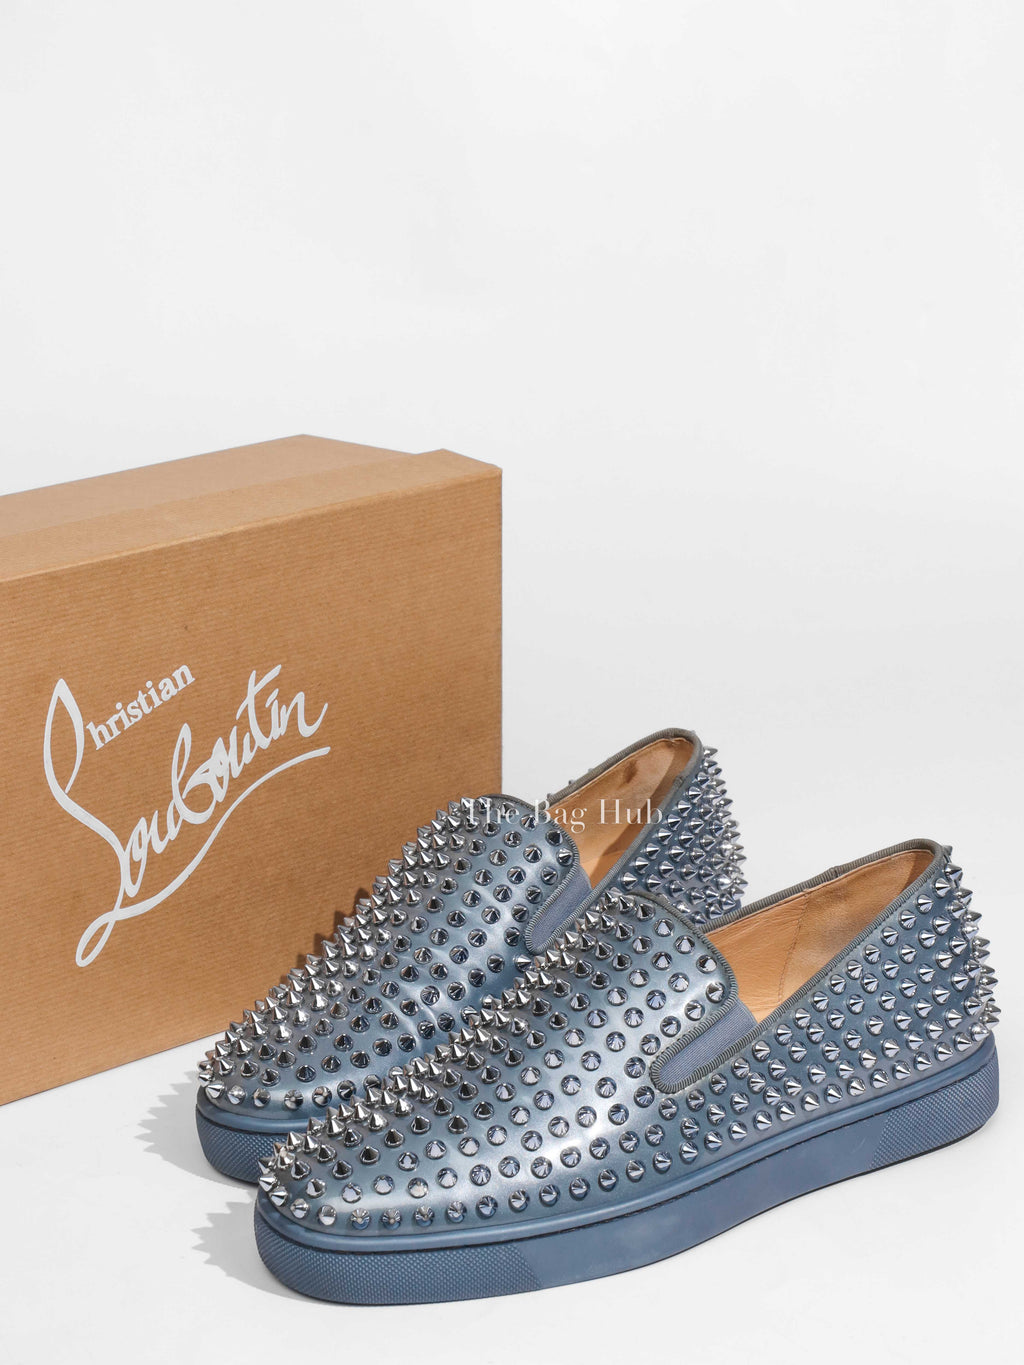 Christian Louboutin Bluish Silver Patent Roller Boat Spike Slip-On Sneakers Size 40-1